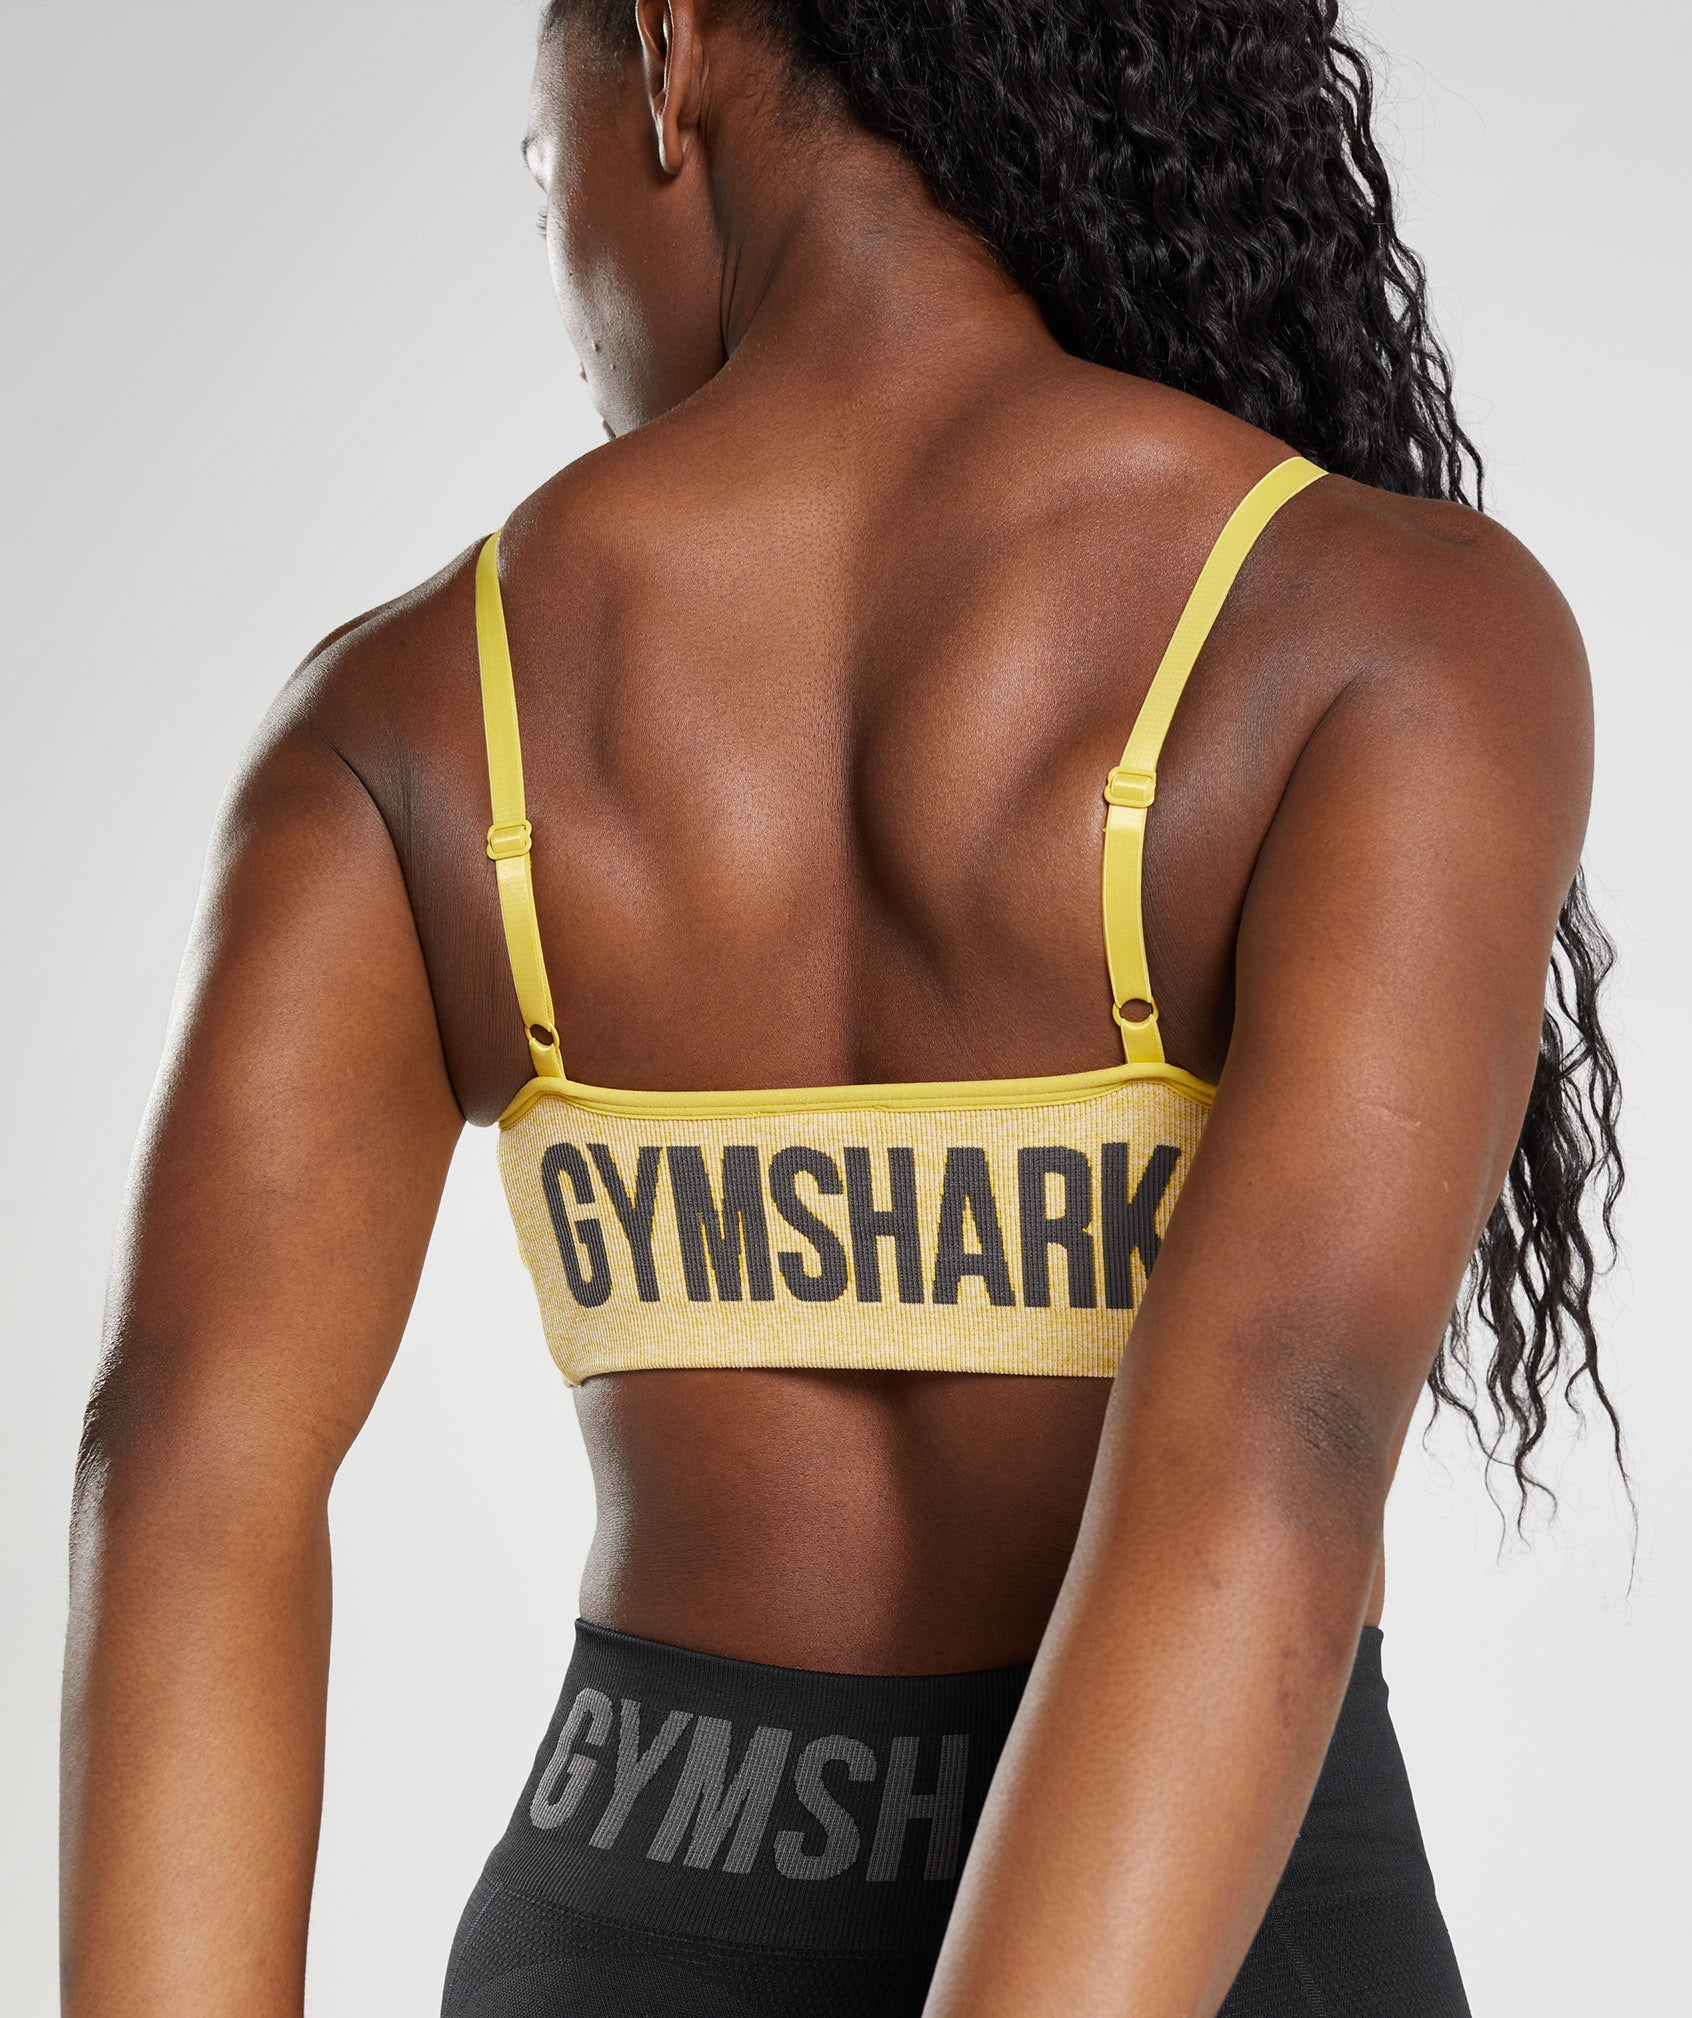 beep bop on X: I need the new @Gymshark yellow set but it's sold